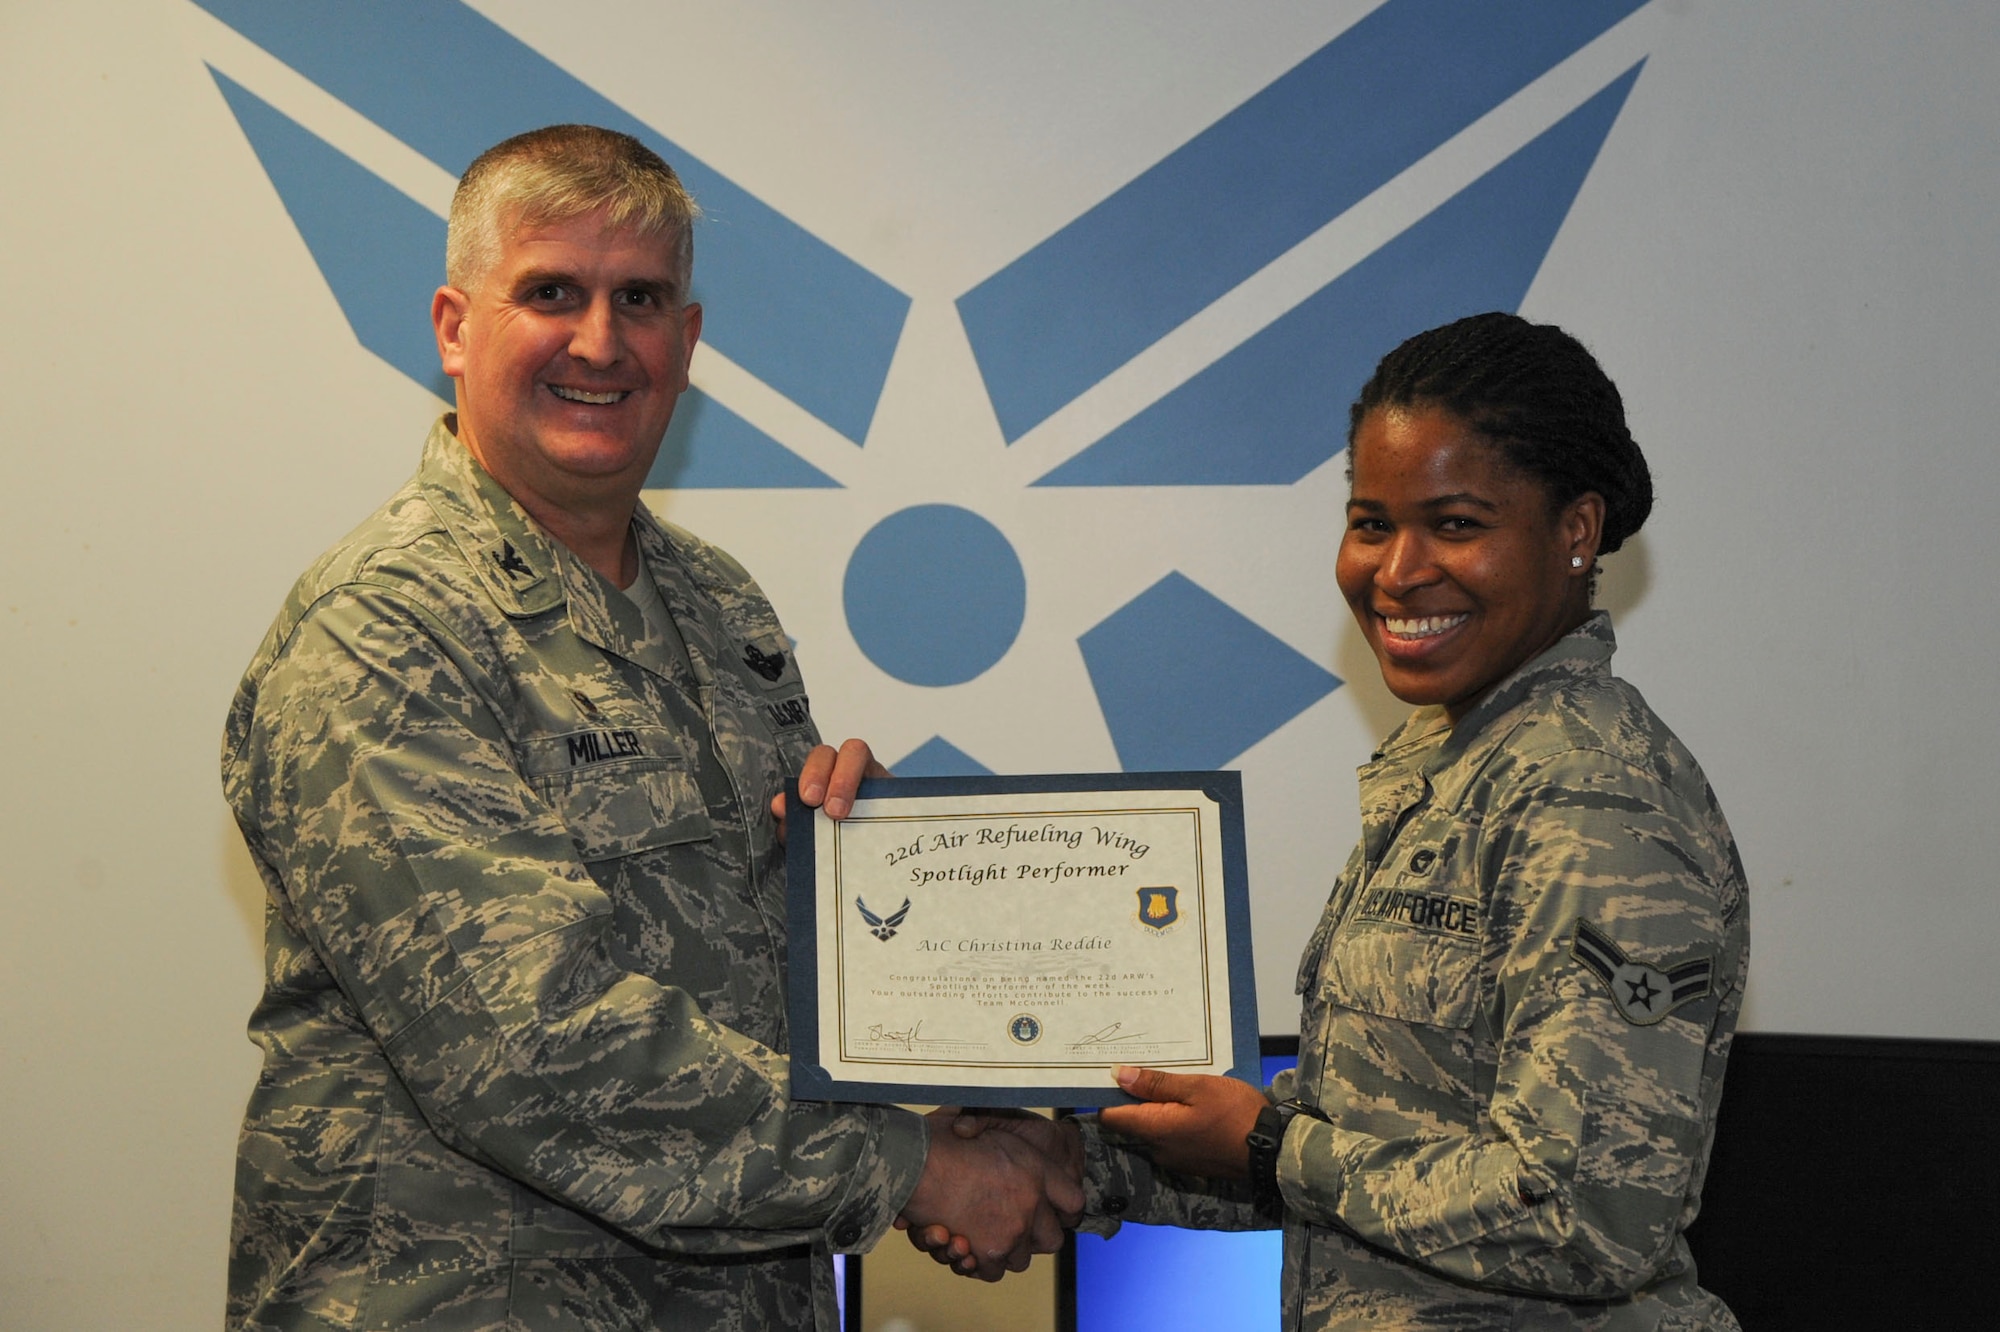 Airman 1st Class Christina Reddie, 22nd Logistics Readiness Squadron vehicle operator, poses with Col. Albert Miller, 22nd Air Refueling Wing commander, Dec. 12, 2016, at McConnell Air Force Base, Kan. Reddie received the spotlight performer for the week of Nov. 28- Dec. 2. (U.S. Air Force photo/Airman 1st Class Jenna K. Caldwell)